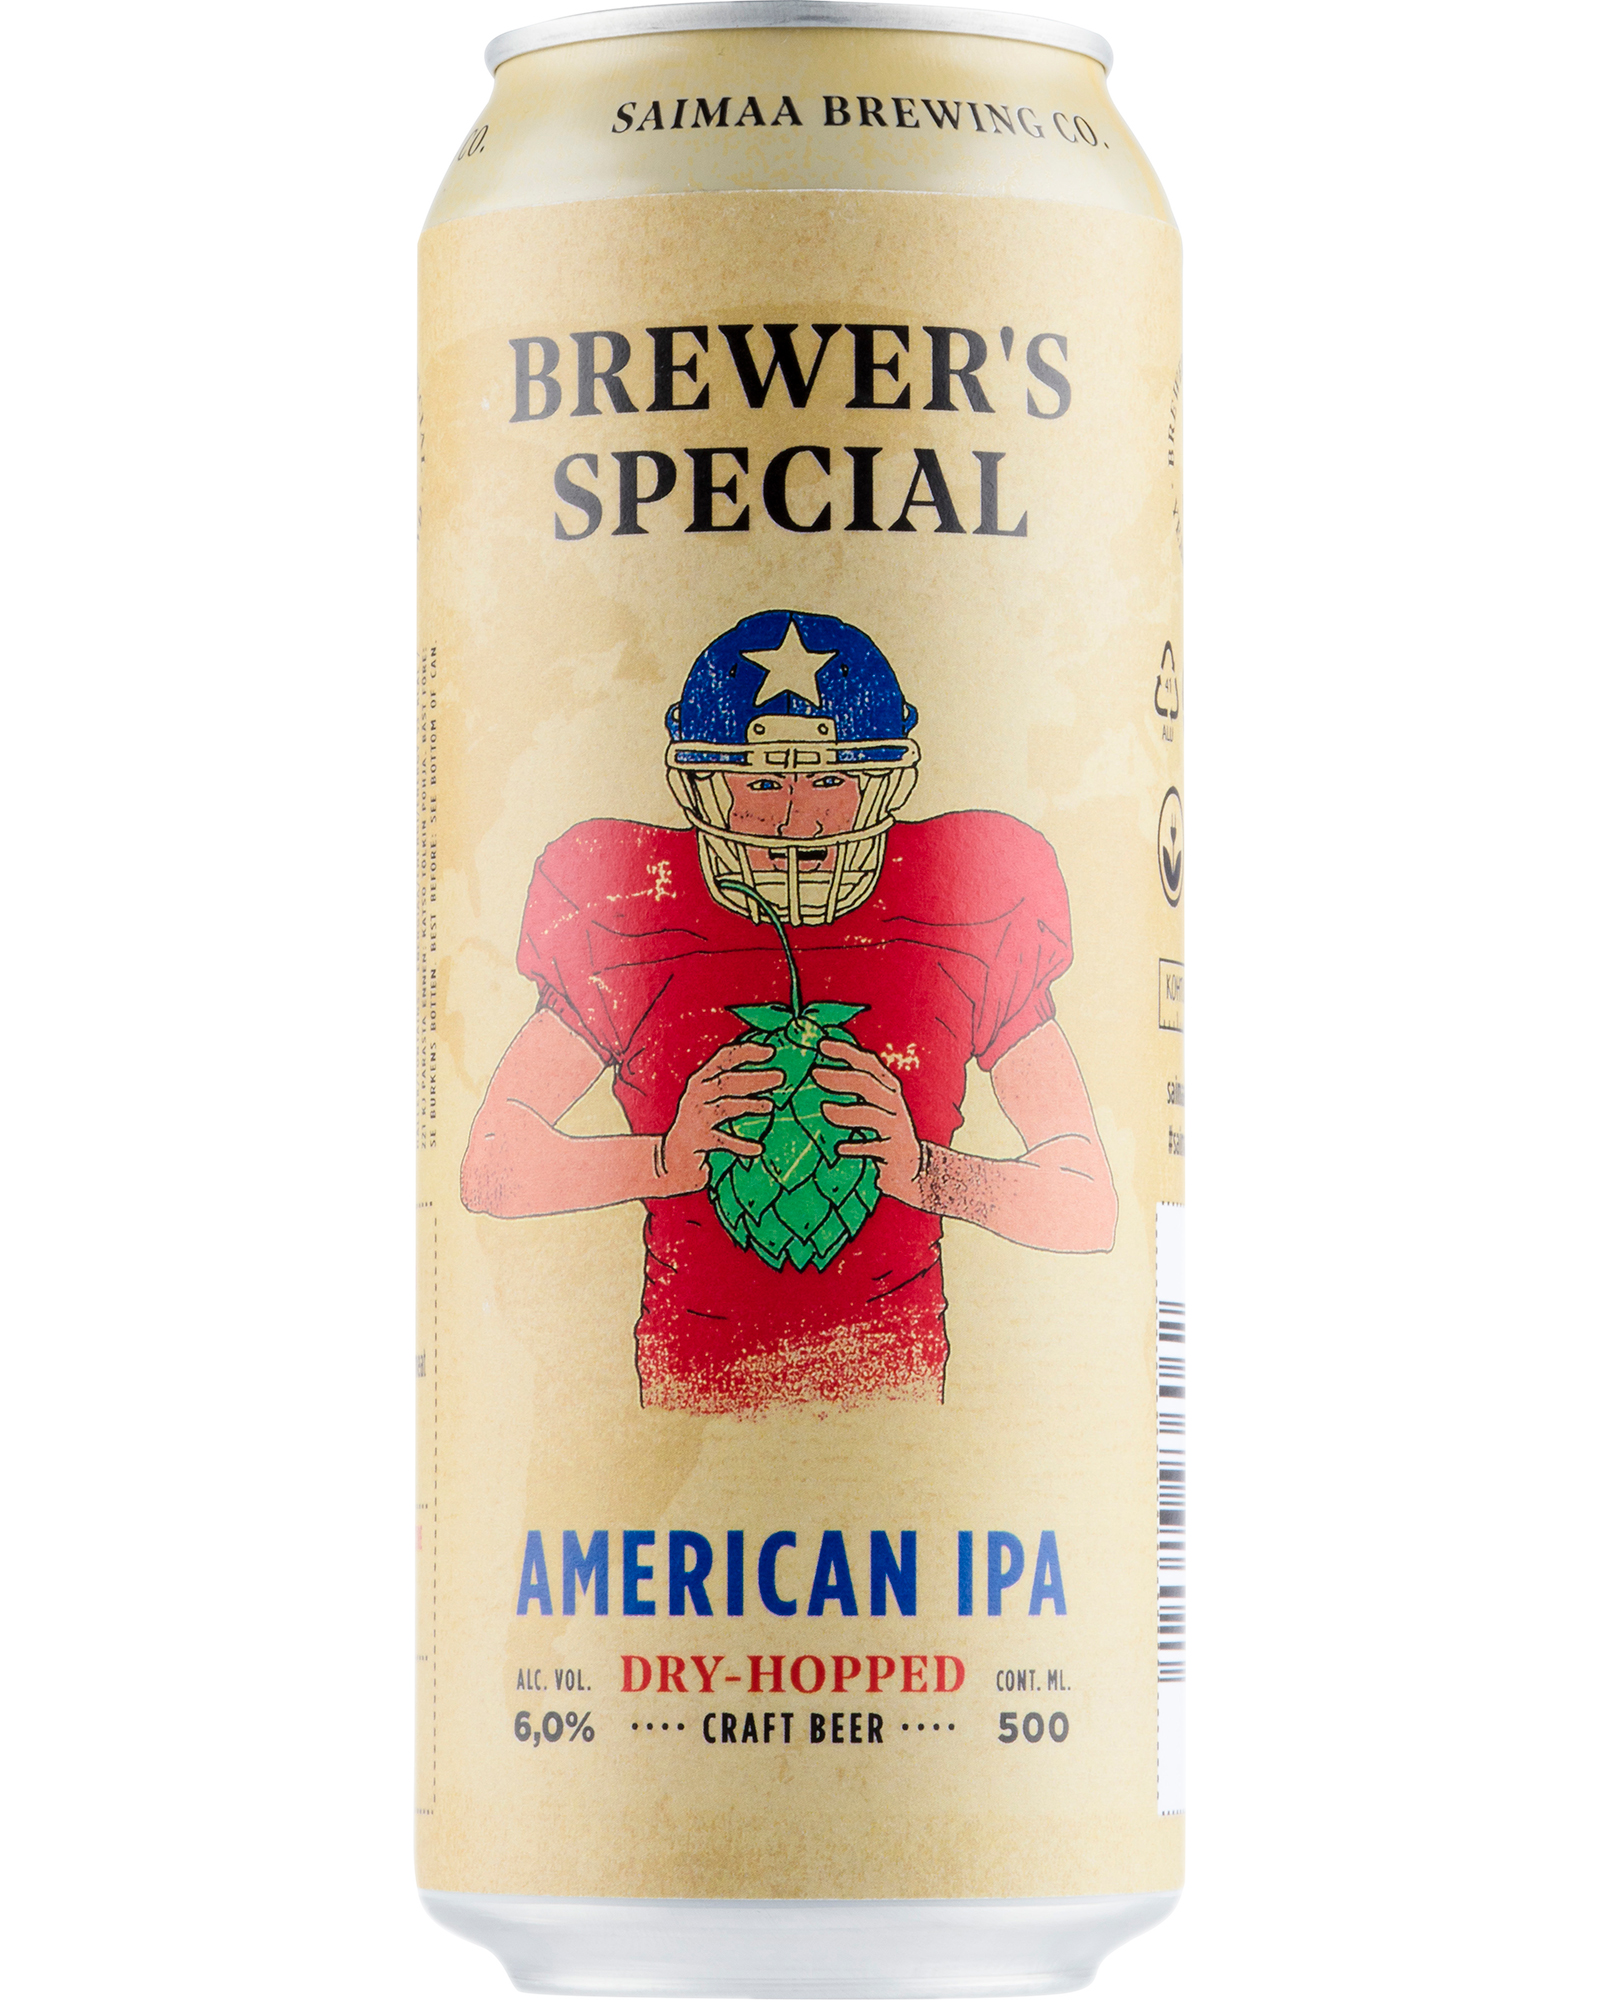 Saimaan Brewer’s Special American IPA can